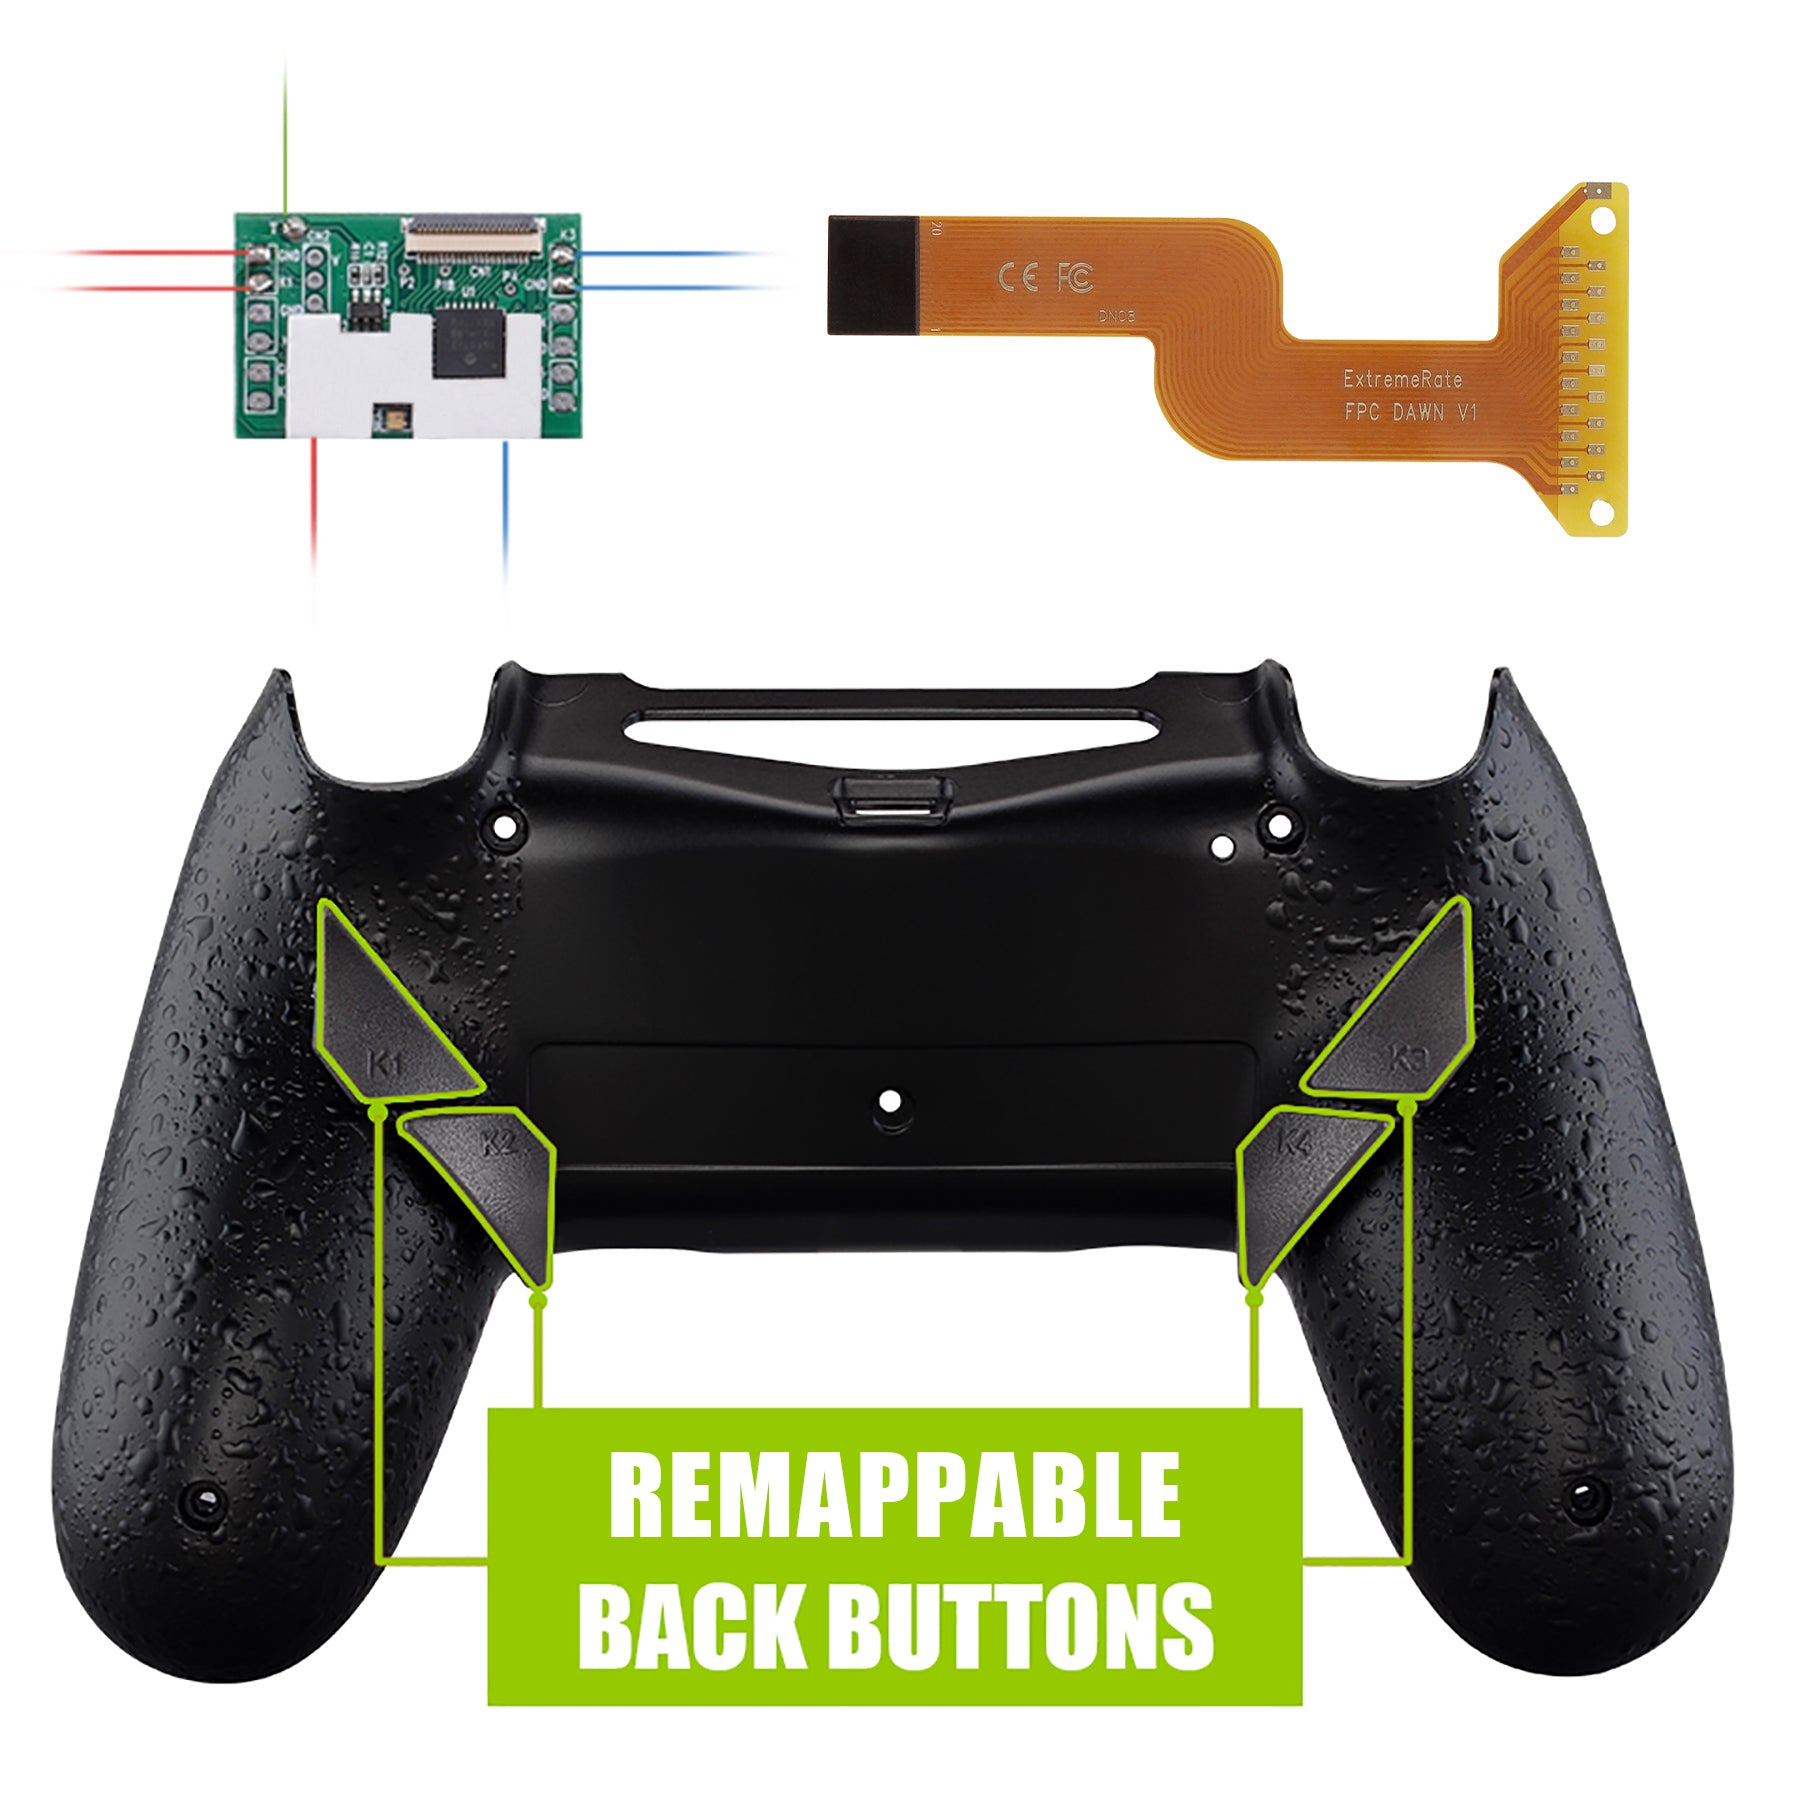 Textured Black Dawn Remappable Remap Kit with Redesigned Back Shell & 4 Back Buttons for ps4 Controller JDM 040/050/055 - P4RM006 eXtremeRate